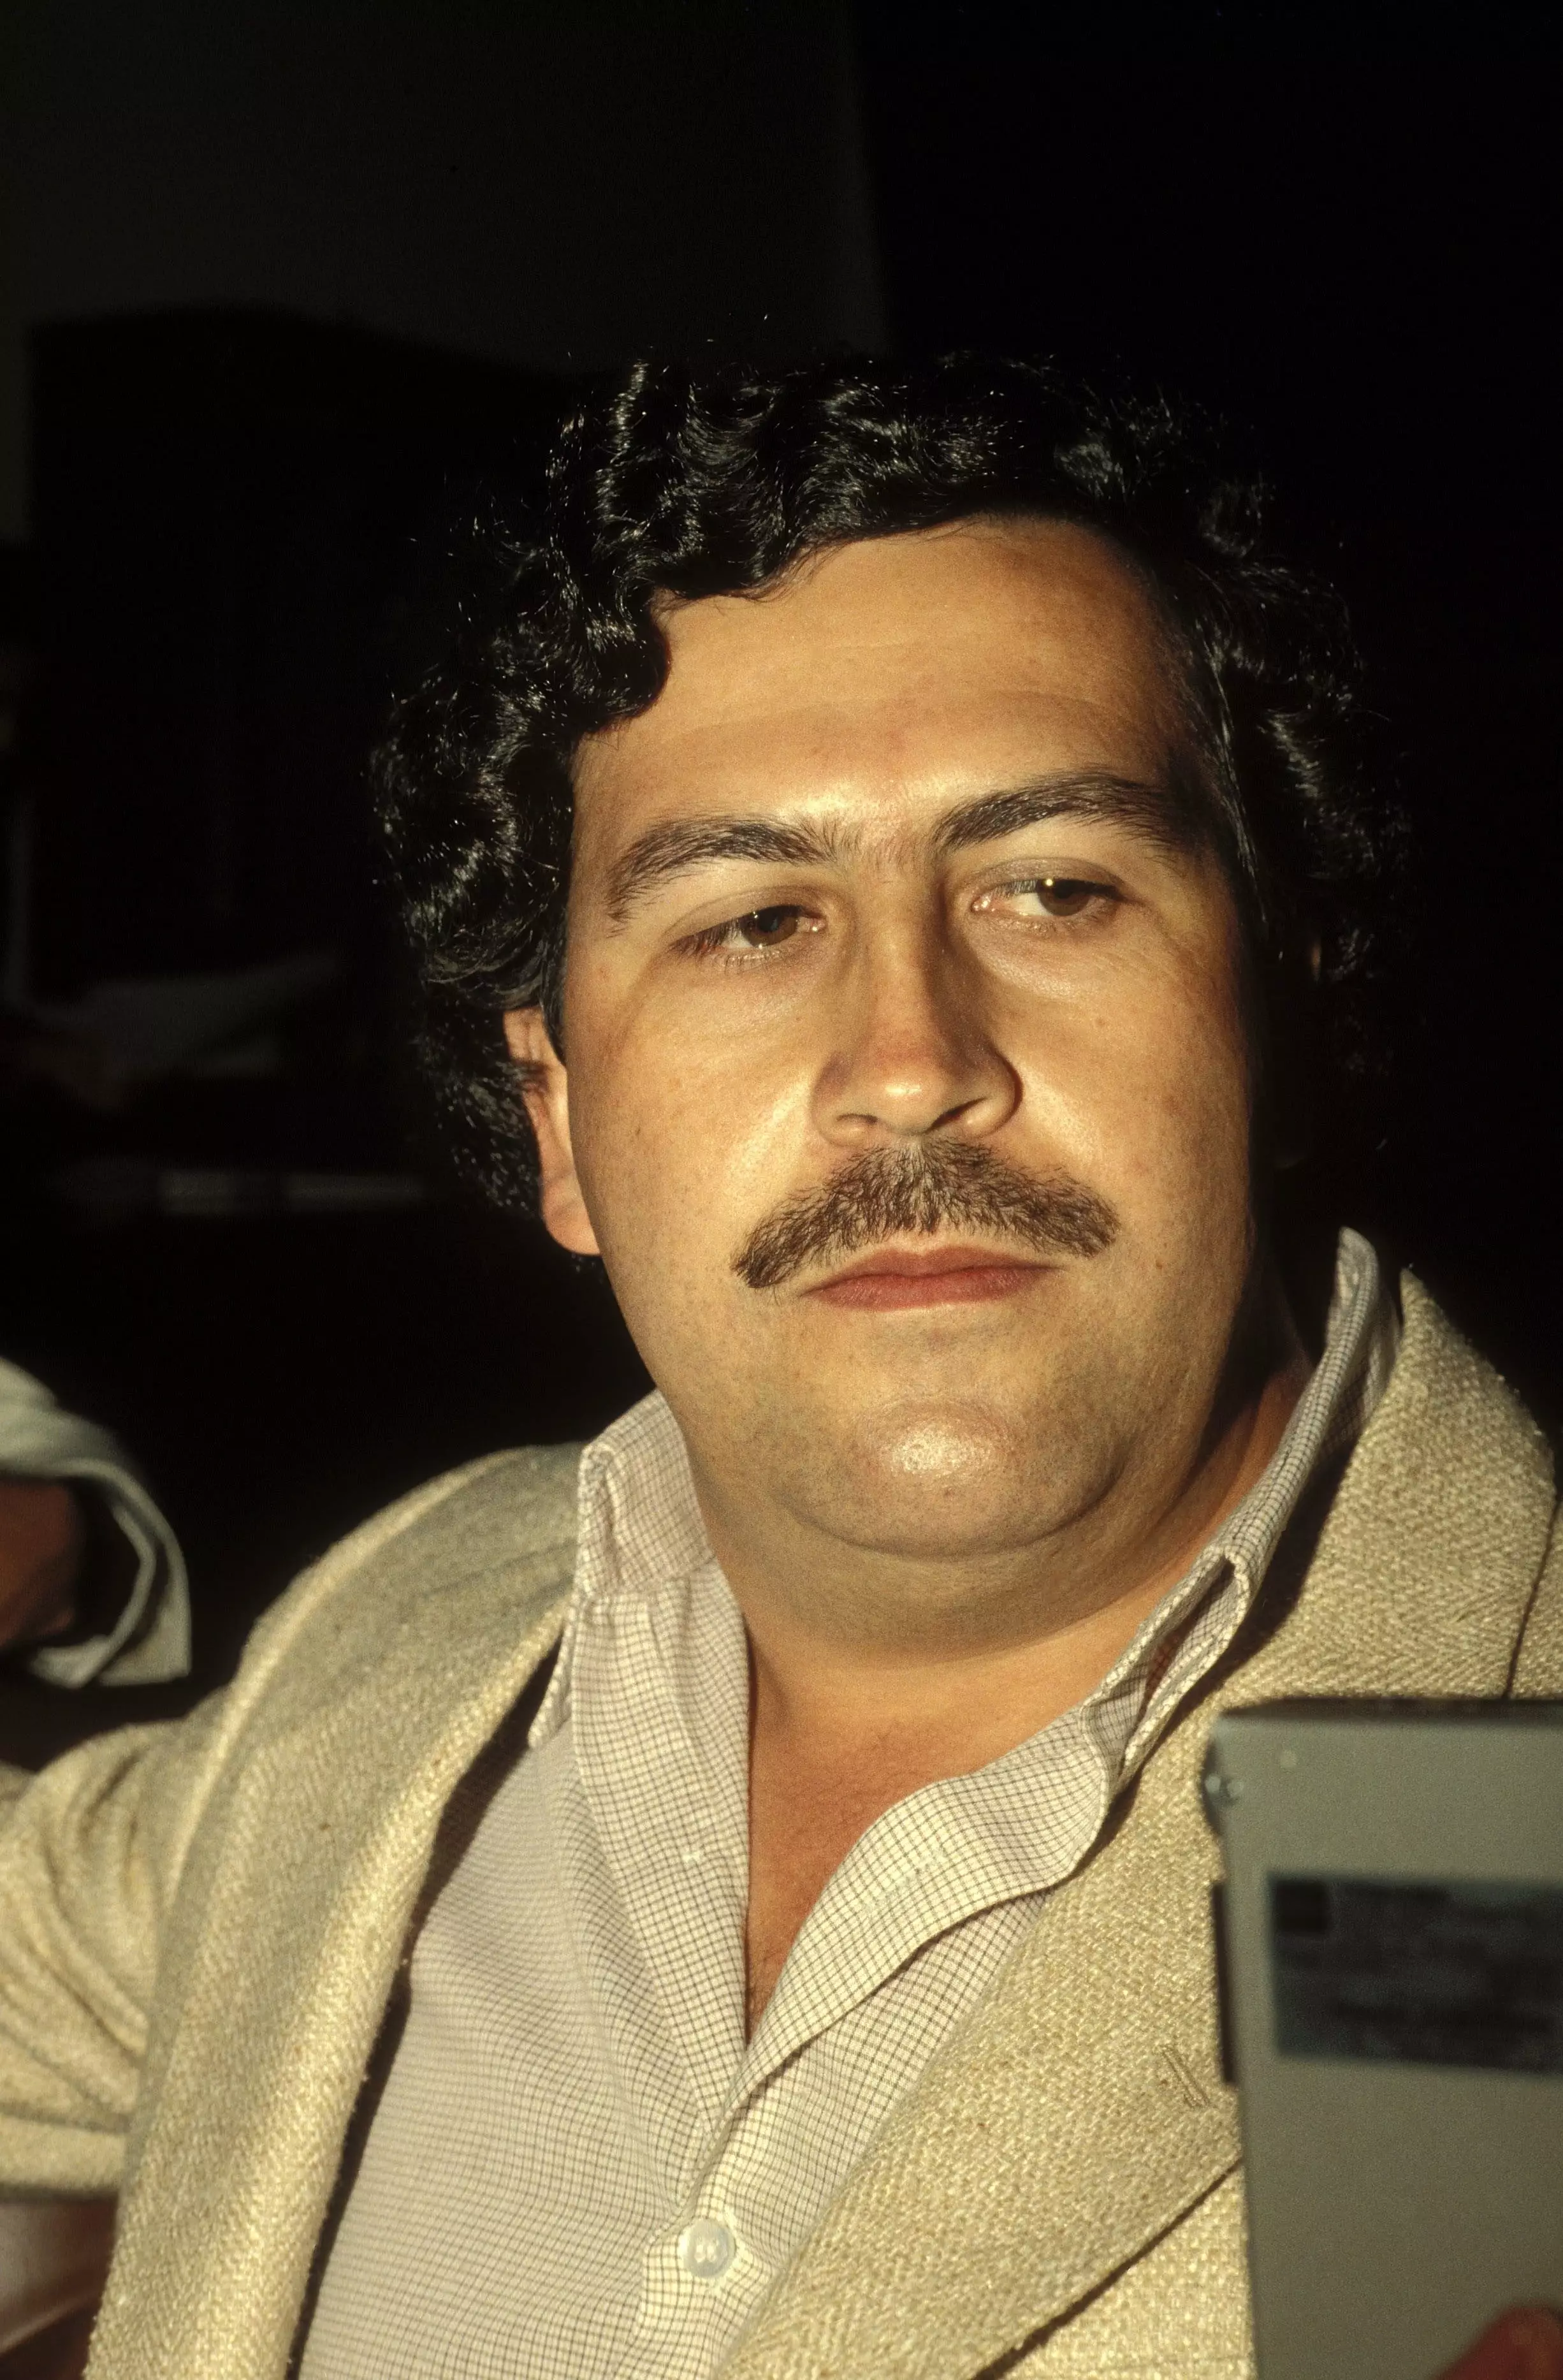 Roberto was the accountant to his drug lord brother Pablo.